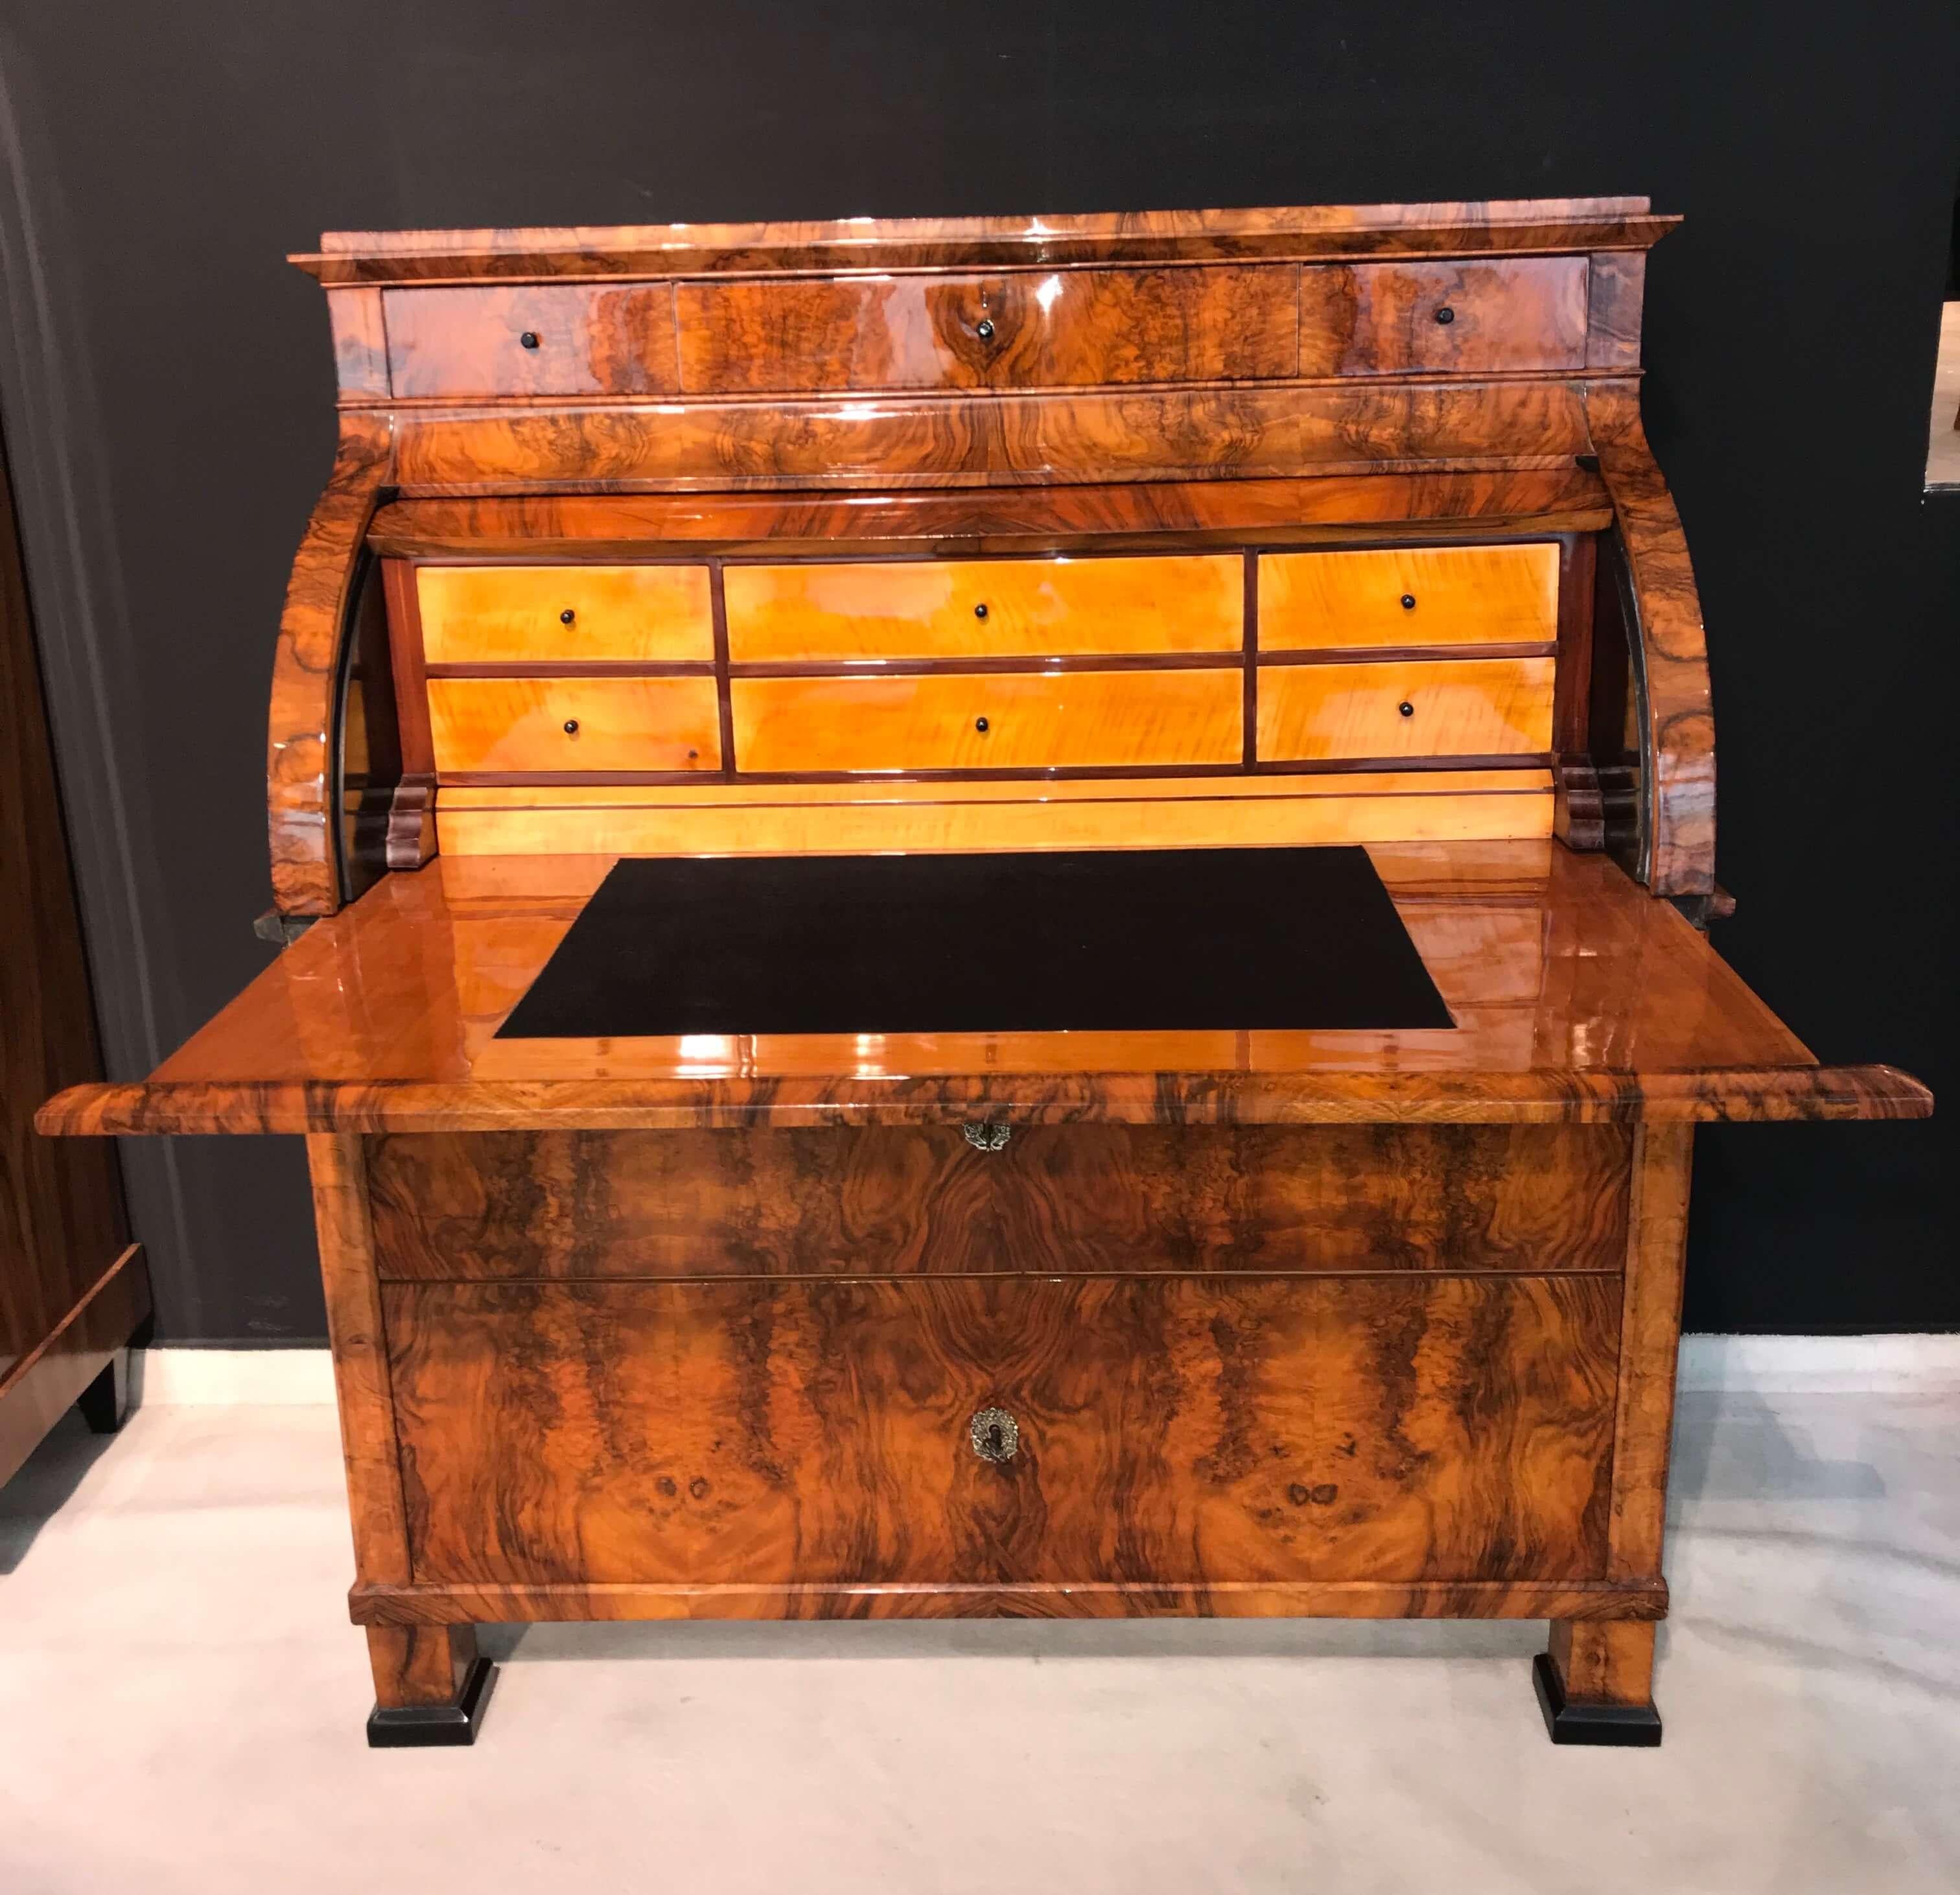 Elegant, classicist Biedermeier cylinder Secretaire from South Germany, circa 1820.

Wonderful walnut veneer, inside with maple and mahogany inlays. Fine original brass fittings.
Two big drawers in the bottom, three head-drawers at the